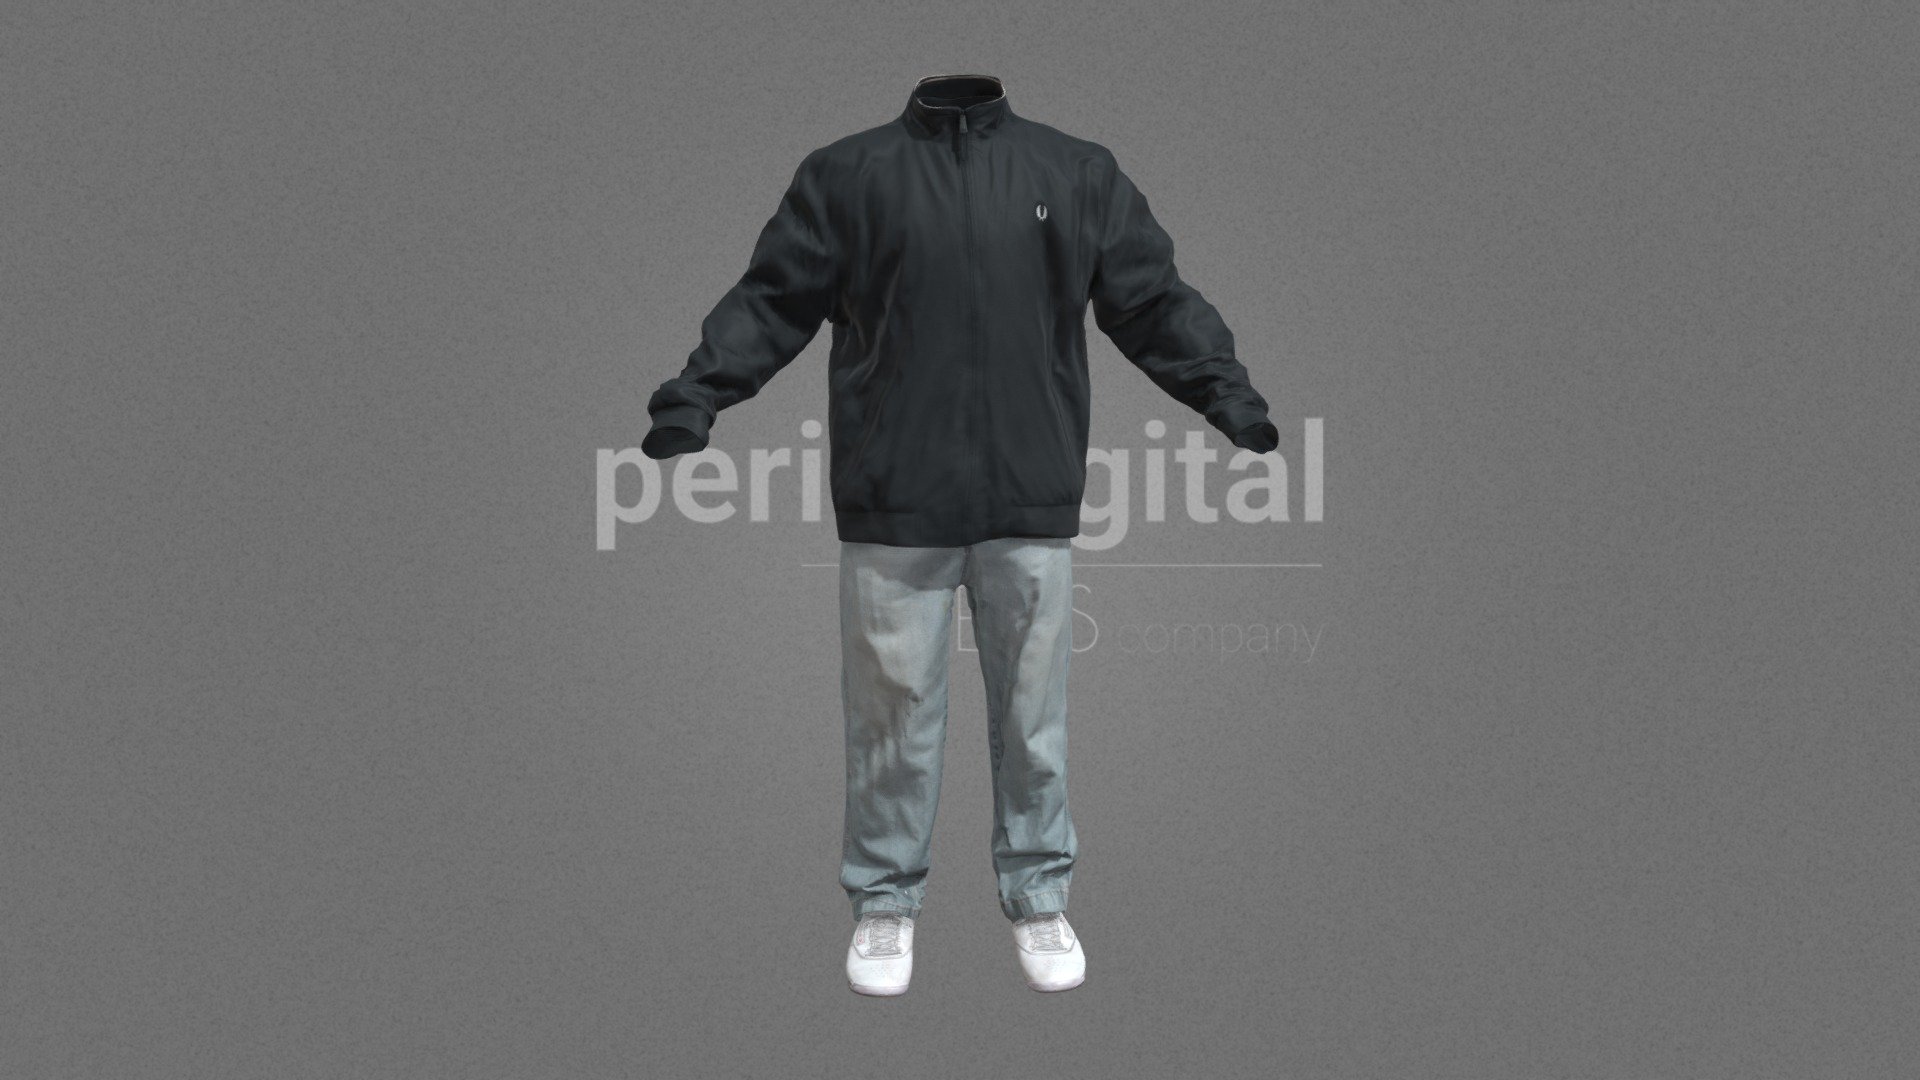 Black jacket, blue jeans, white shoes

PERIS DIGITAL HIGH QUALITY 3D CLOTHING They are optimized for use in medium/high poly 3D scenes and optimized for rendering. We do not include characters, but they are positioned for you to include and adjust your own character. They have a LOW Poly Mesh (LODRIG) inside the Blender file (included in the AdditionalFiles), which you can use for vertex weighting or cloth simulation and thus, make the transfer of vertices or property masks from the LOW to the HIGH model. We have included in Additional Files, the texture maps in high resolution, as well as the Displacement maps in high resolution too, so you can perform extreme point of view with your 3D cameras. With the Blender file (included in AdditionalFiles) you will be able to edit any aspect of the set . Enjoy it!

Web: https://peris.digital/ - 80s Fashion Series - Man 27 - 3D model by Peris Digital (@perisdigital) 3d model